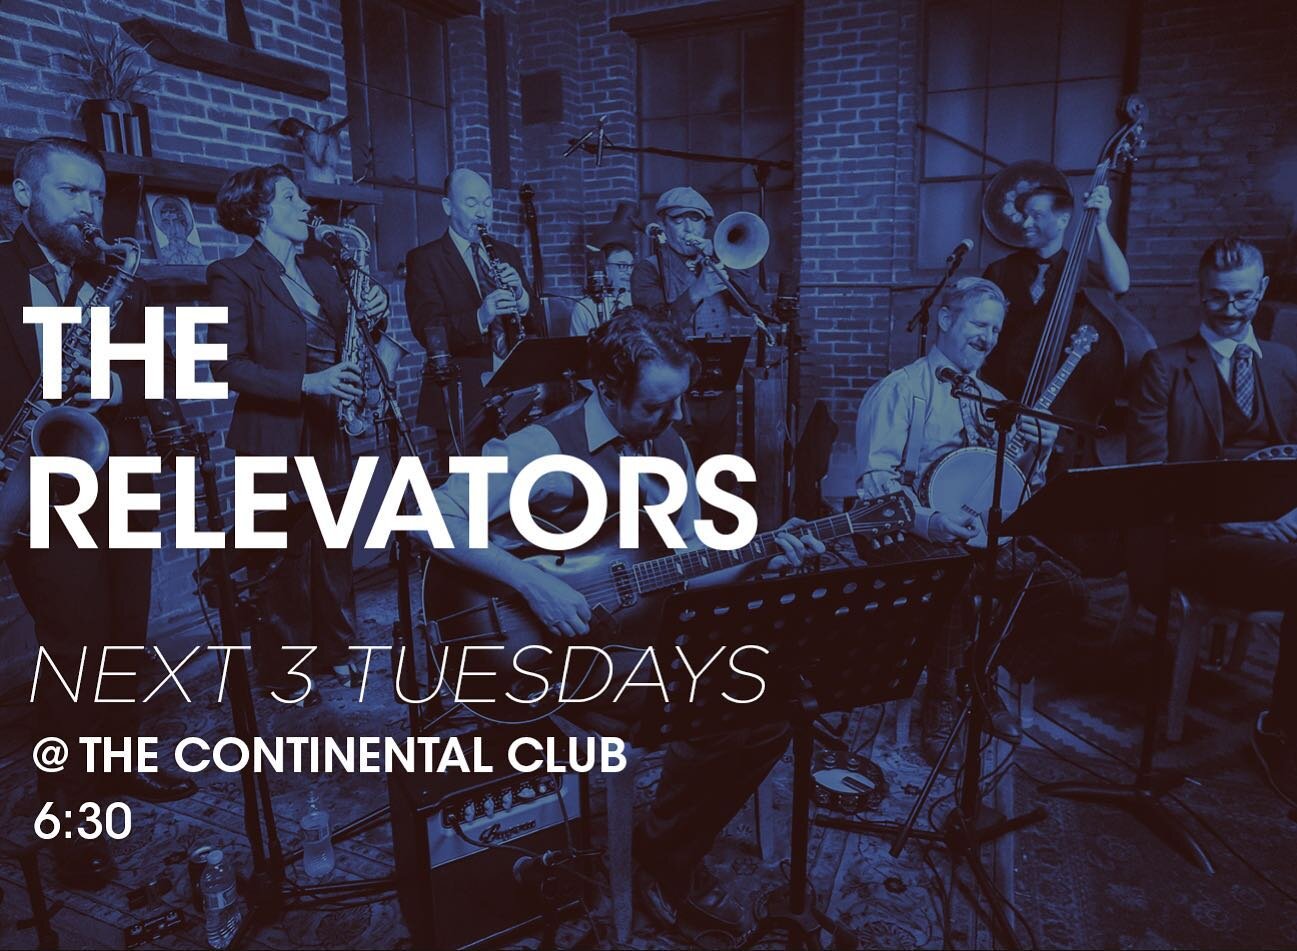 About to hit with @therelevators at @continentalclubatx - come on down and swing!